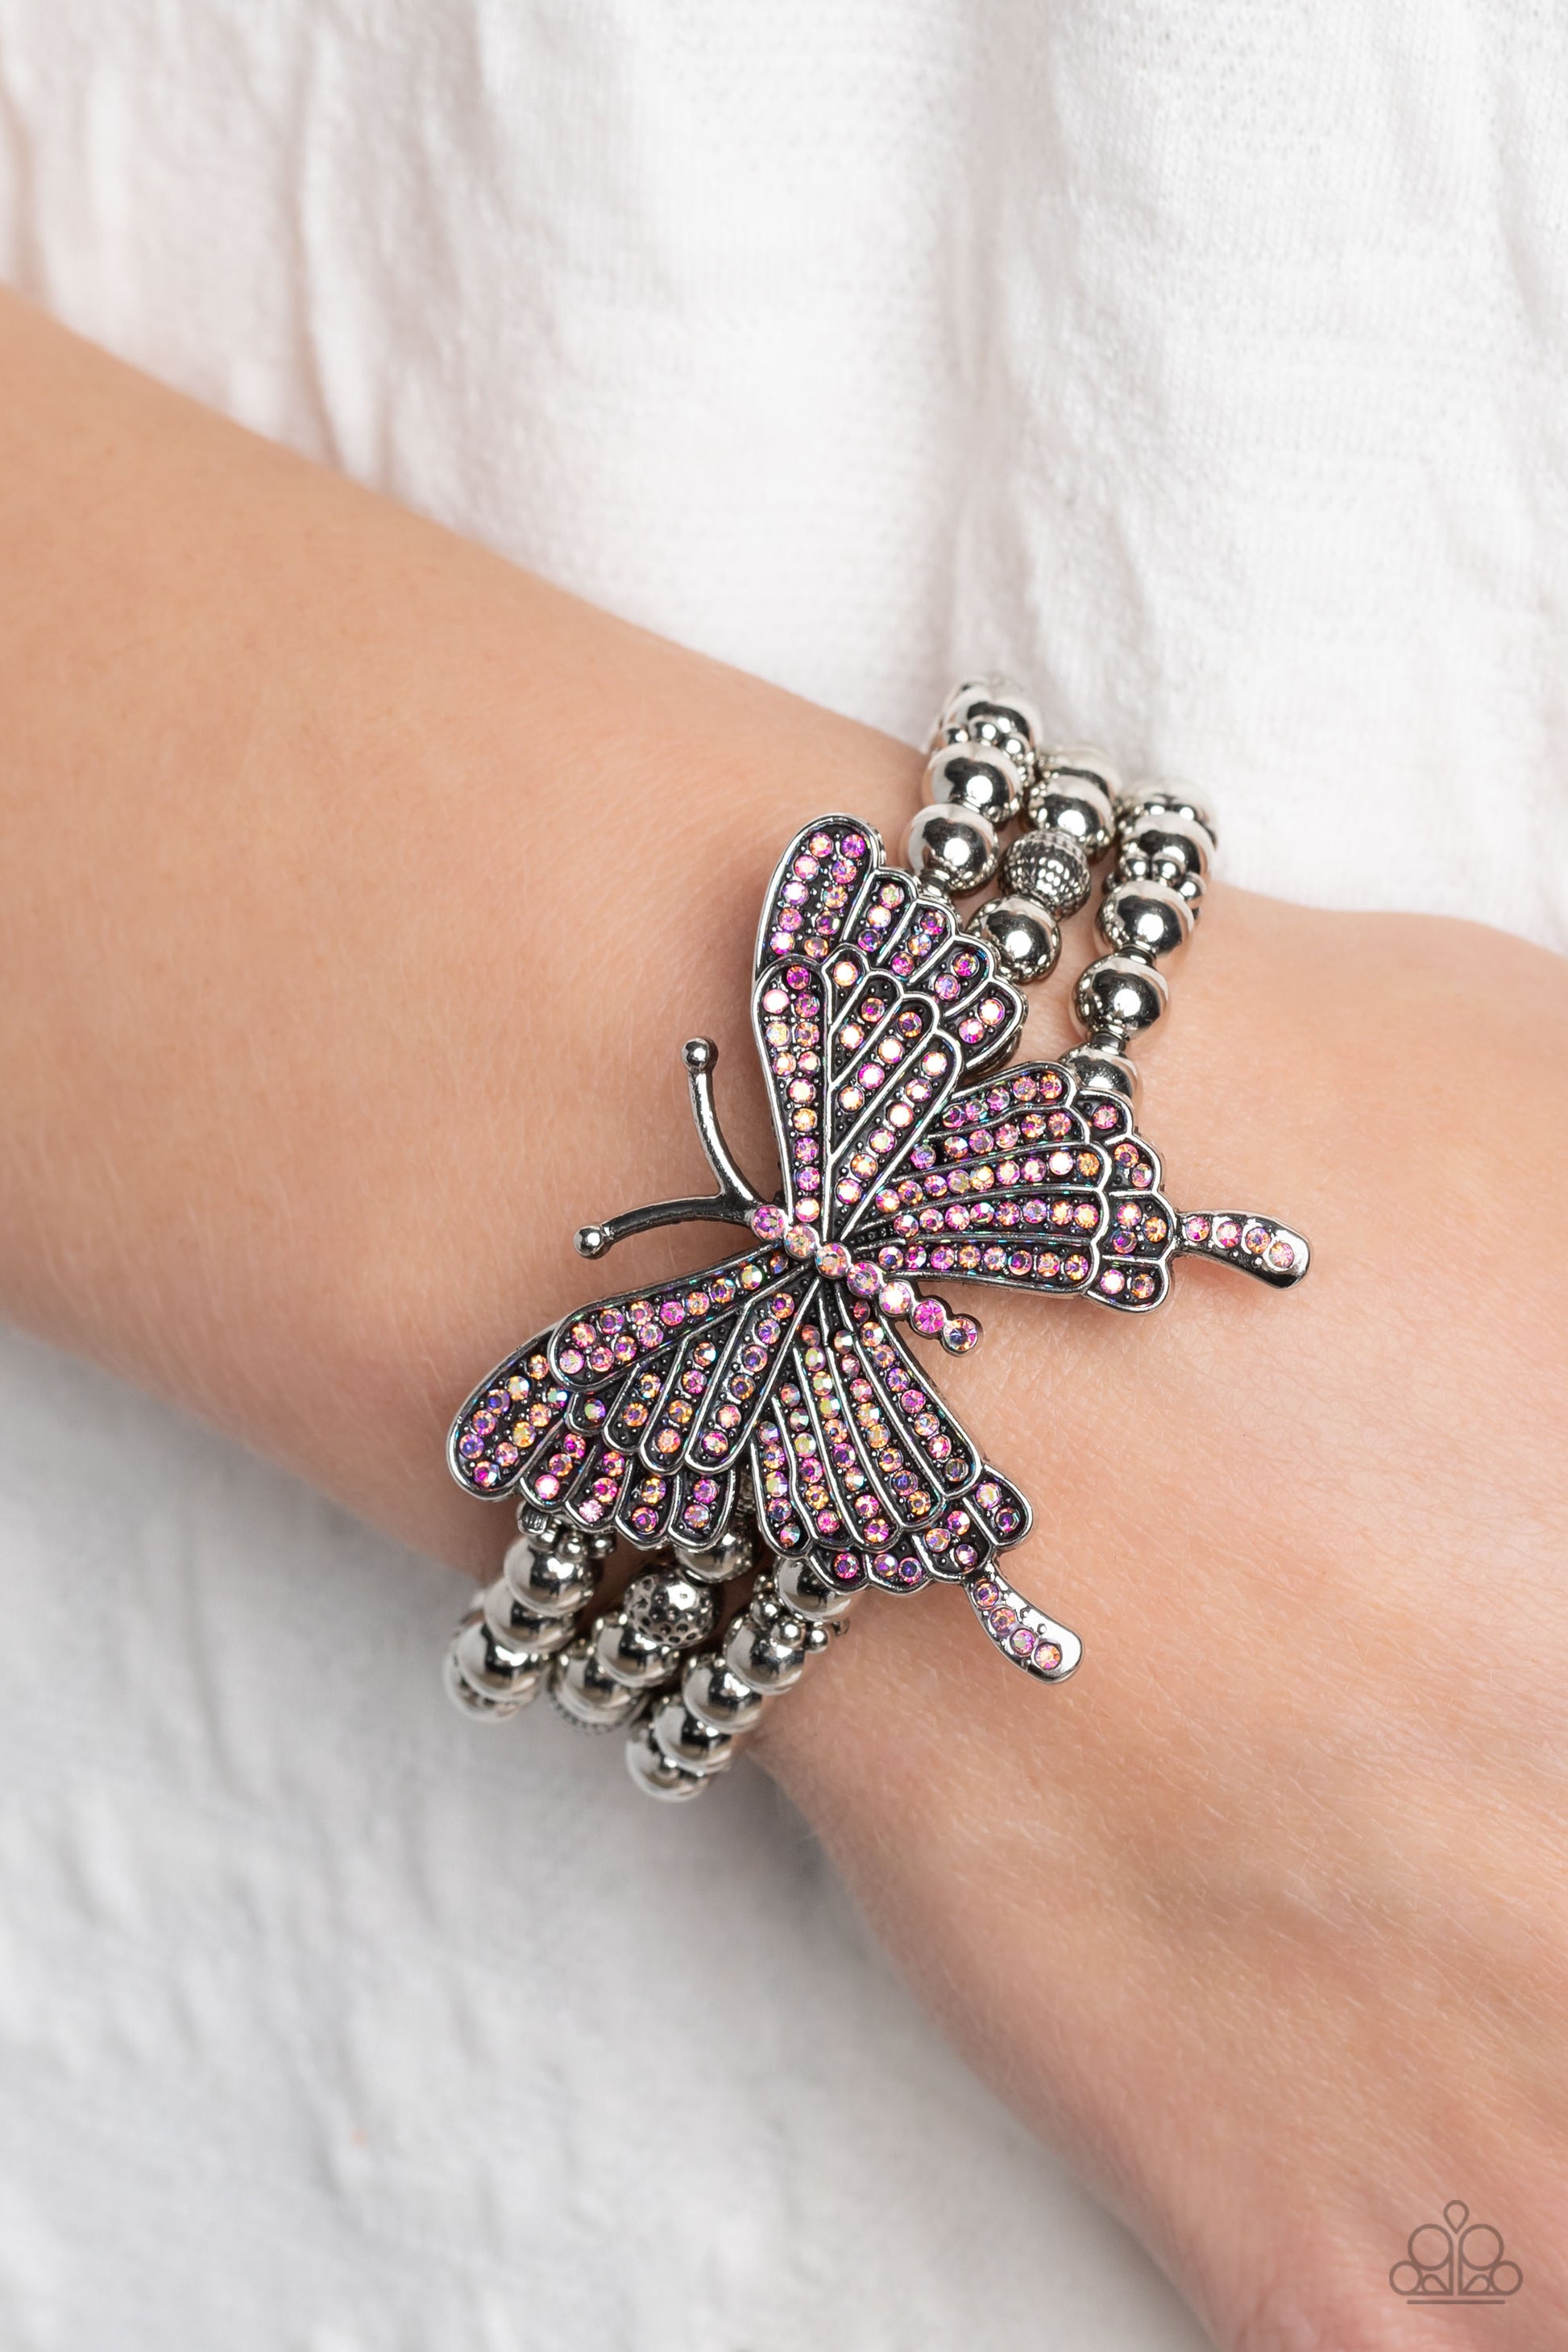 Paparazzi Accessories First WINGS First - Pink Strung along elastic stretchy bands, a trio of silver and textured silver beads and accents wrap around the wrist. Featured atop the beaded collection, an oversized silver butterfly, with intricate details, i